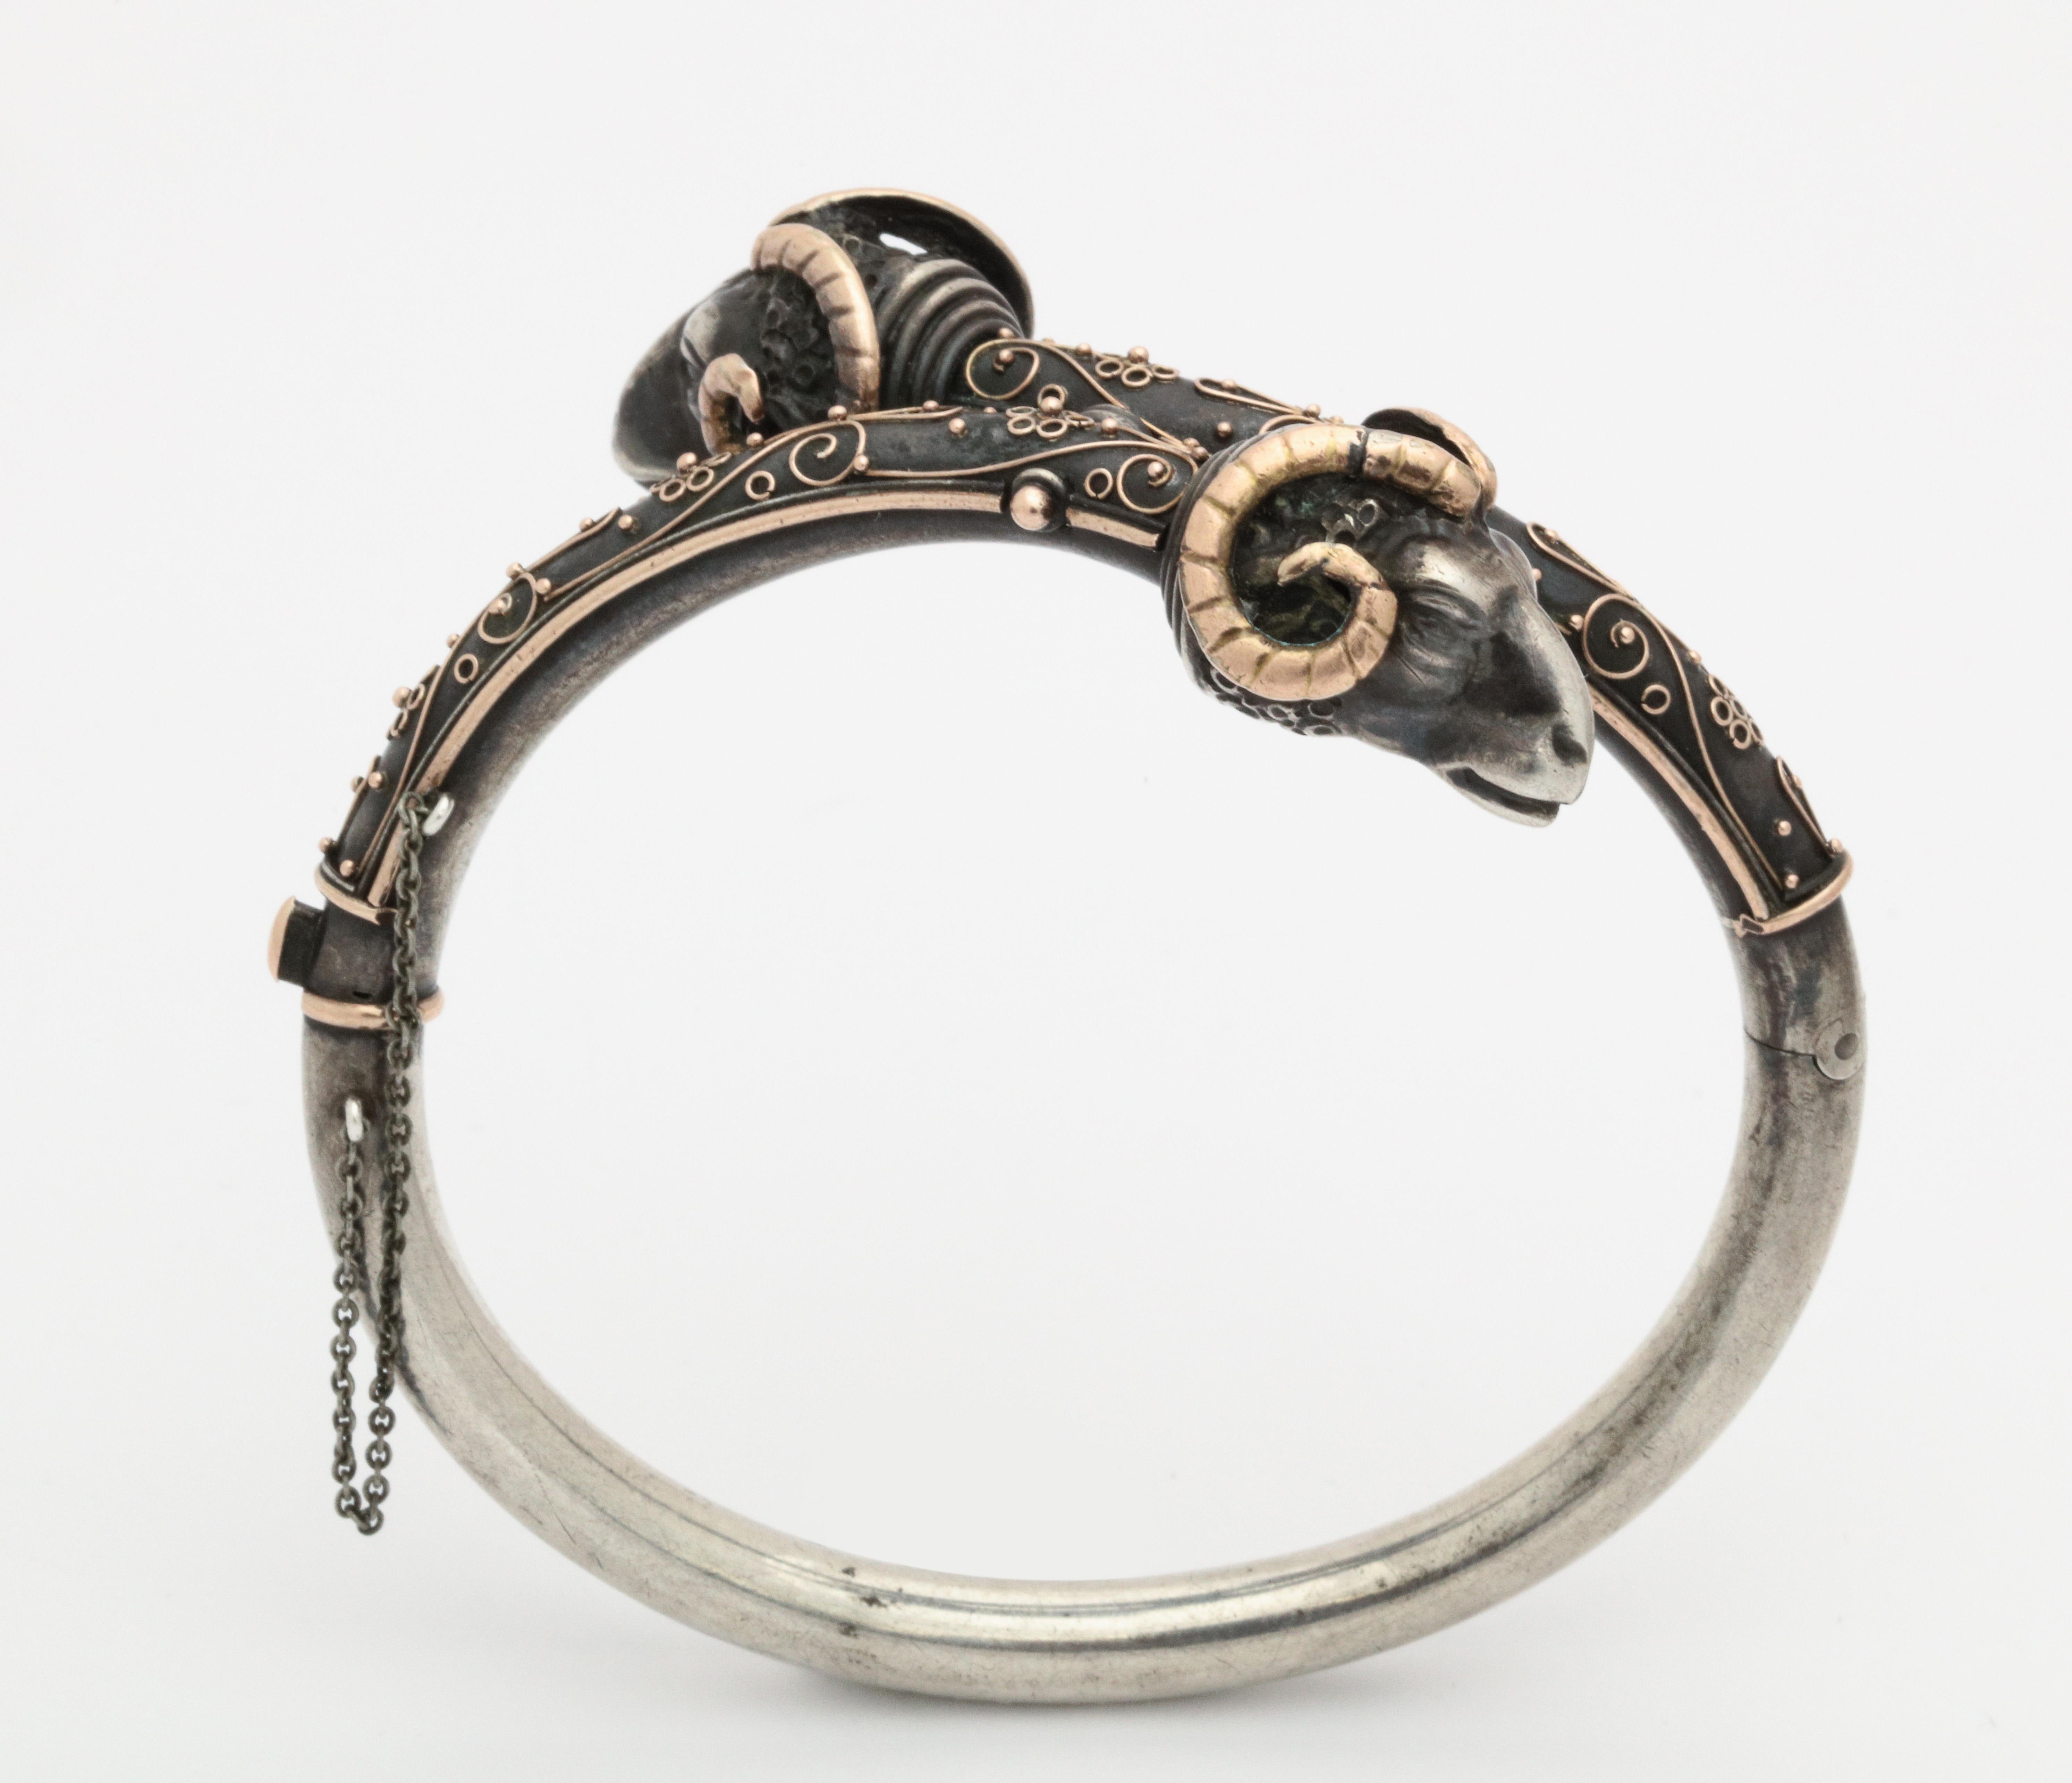 A 15 Kt gold and sterling refined jewel of a bracelet with double rams' heads and en rusted gold raised texture. The detail is the icing on the Ram. Certainly enlarge the photos to see the dimpled tufted coat, the striated gold horns and the strong